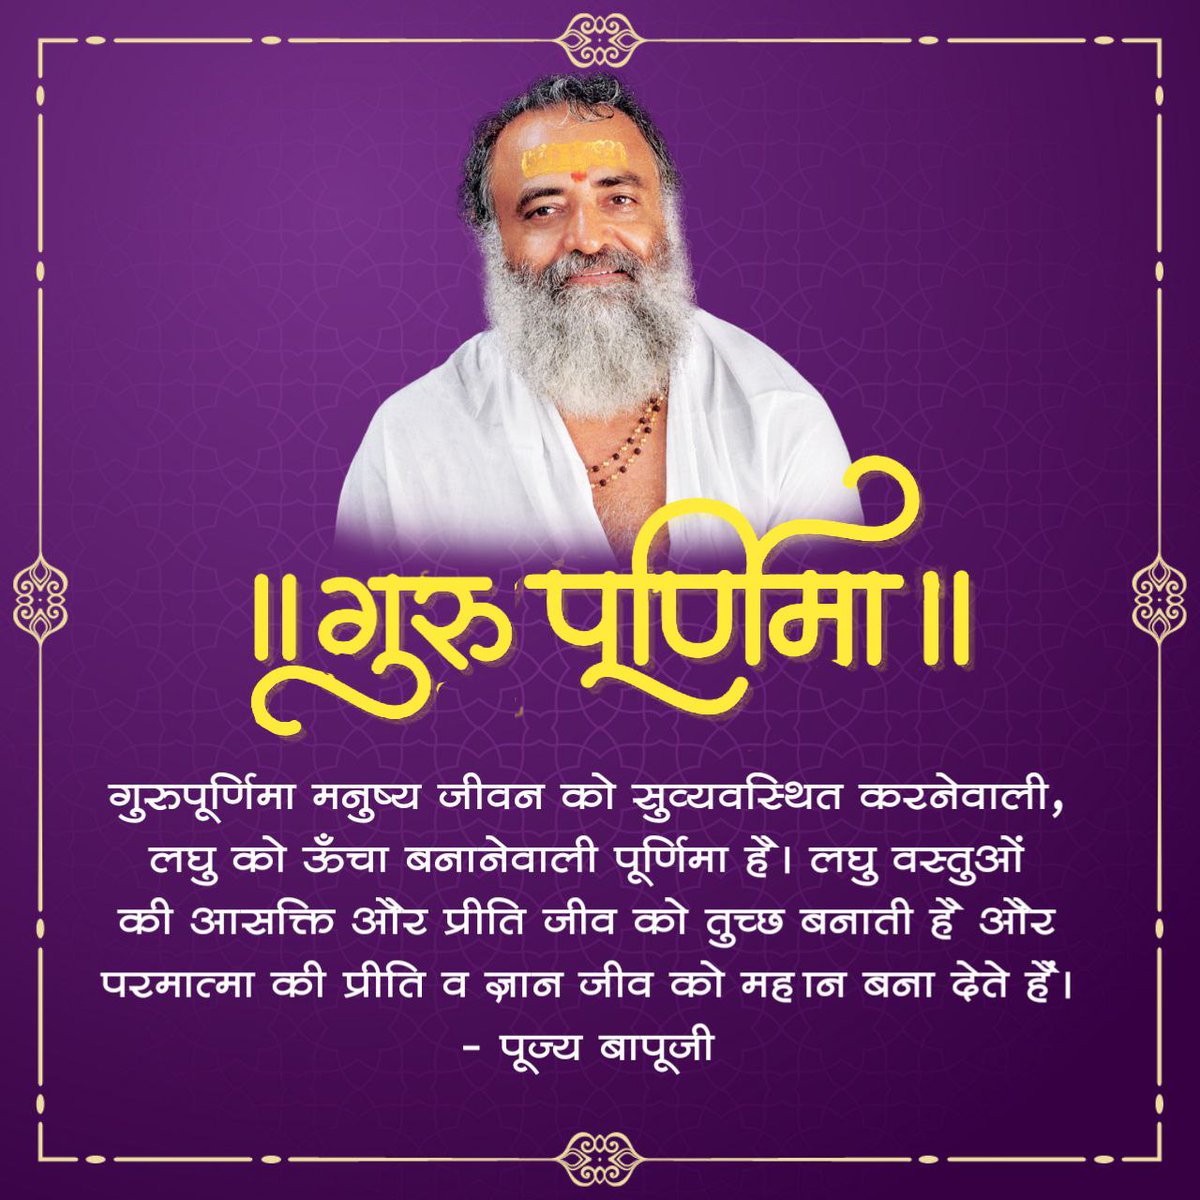 How can we #GratitudeToGurudev
Sant Shri Asharamji Bapu
in words for the ultimate goal he has given us?

He filled our animalistic lives with divine virtues.

happy Gurupurnima,
as well as

Rishi Prasad Jayanti...
 जय श्री राम ...